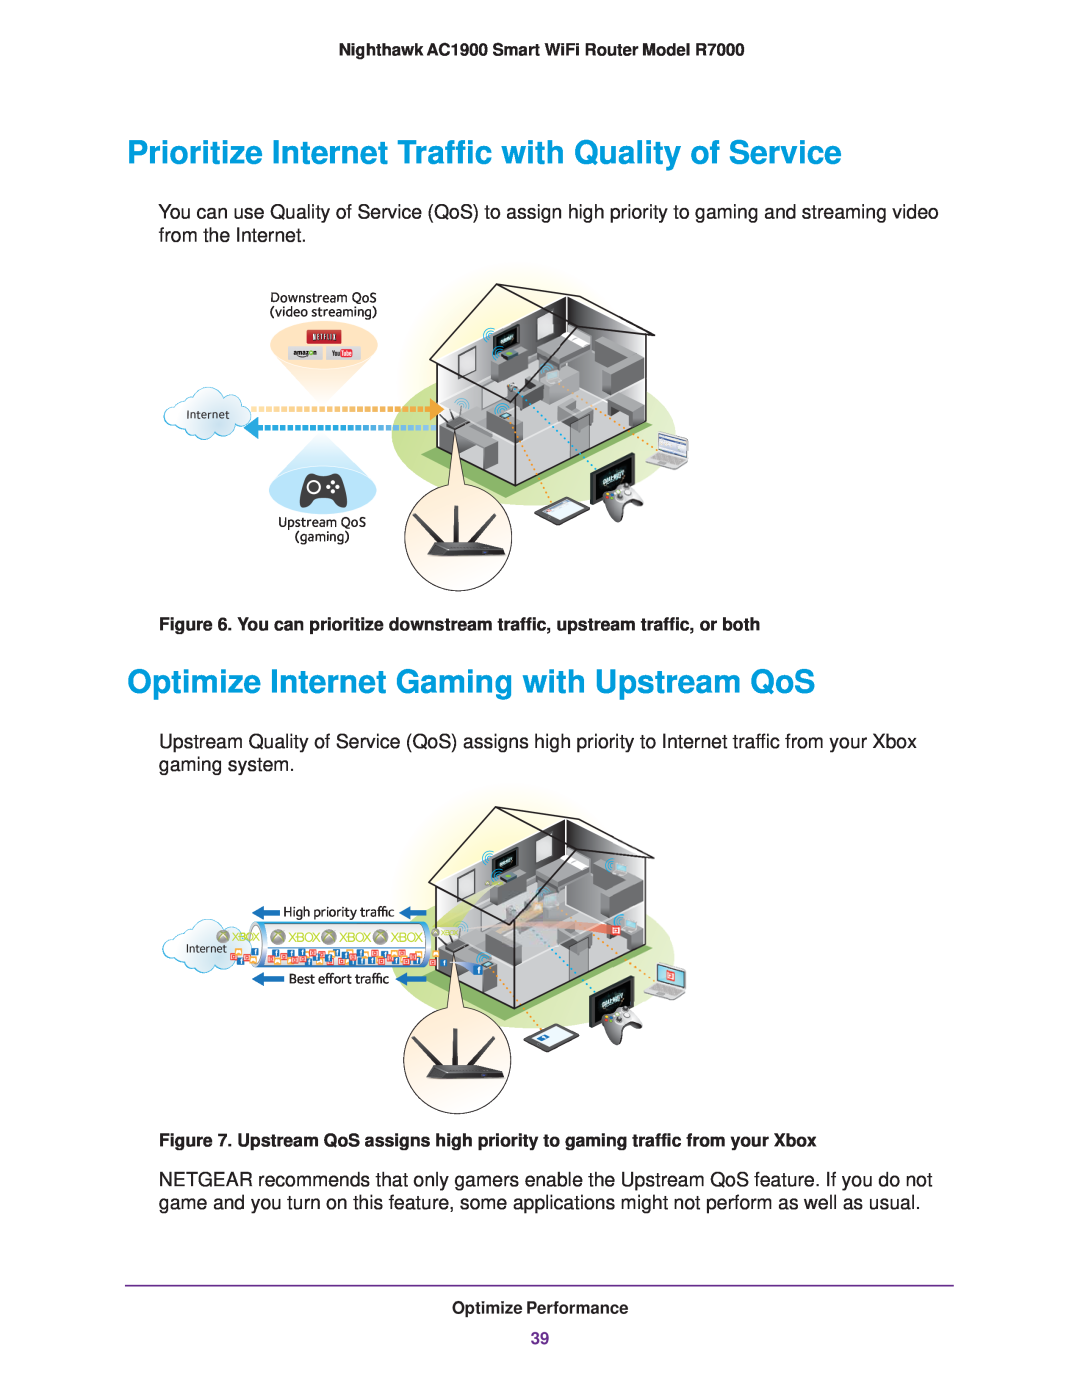 NETGEAR R7000 user manual Prioritize Internet Traffic with Quality of Service, Optimize Internet Gaming with Upstream QoS 